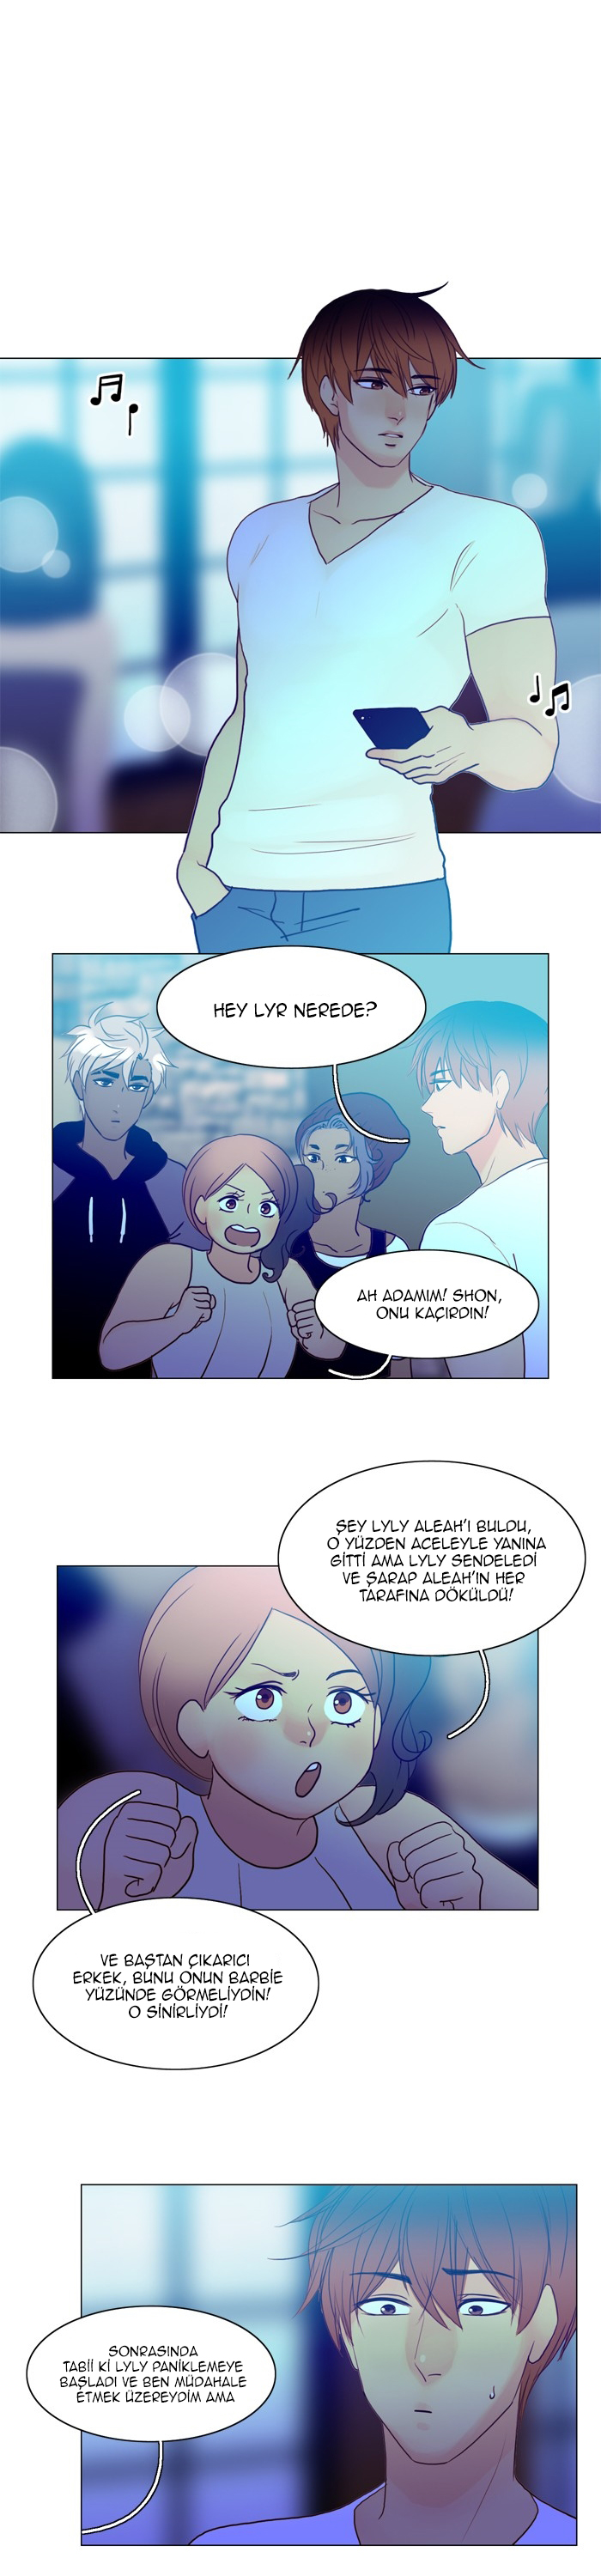 Siren’s Lament: Chapter 56 - Page 2